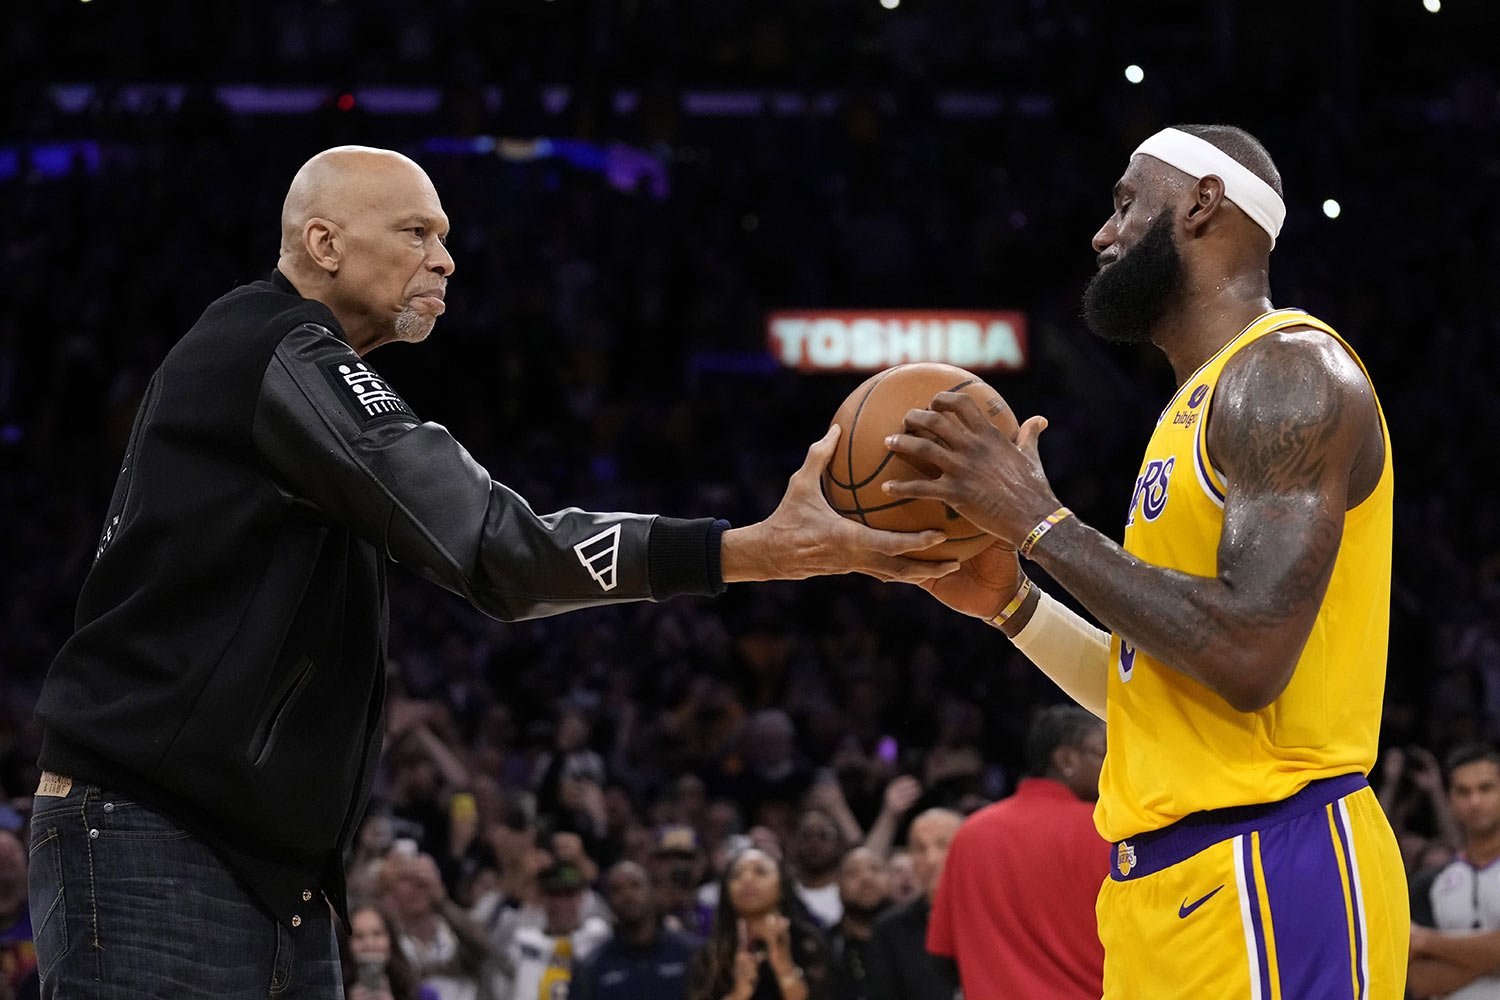  Kareem Abdul-Jabbar, left, hands the ball to Los Angeles Lakers forward LeBron James after passing Abdul-Jabbar to become the NBA's all-time leading scorer during the second half of an NBA basketball game against the Oklahoma City Thunder, in Los An